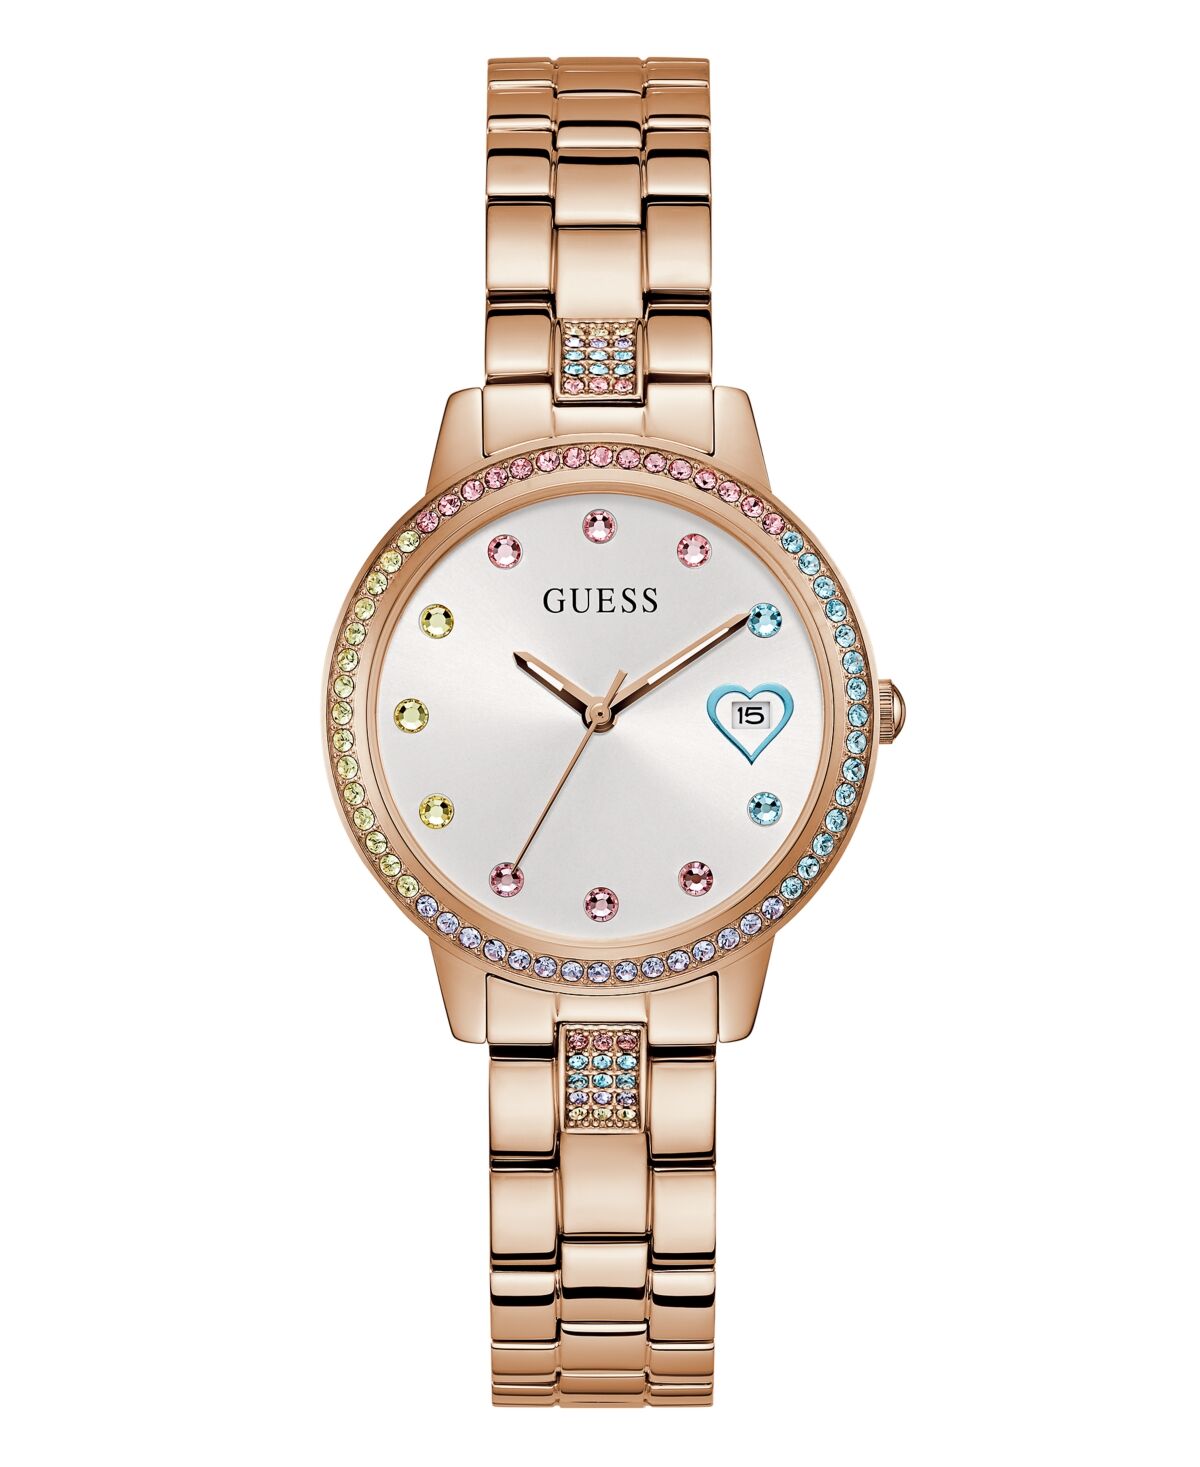 Guess Women's Date Rose Gold-Tone Stainless Steel Watch 34mm - Rose Gold-Tone